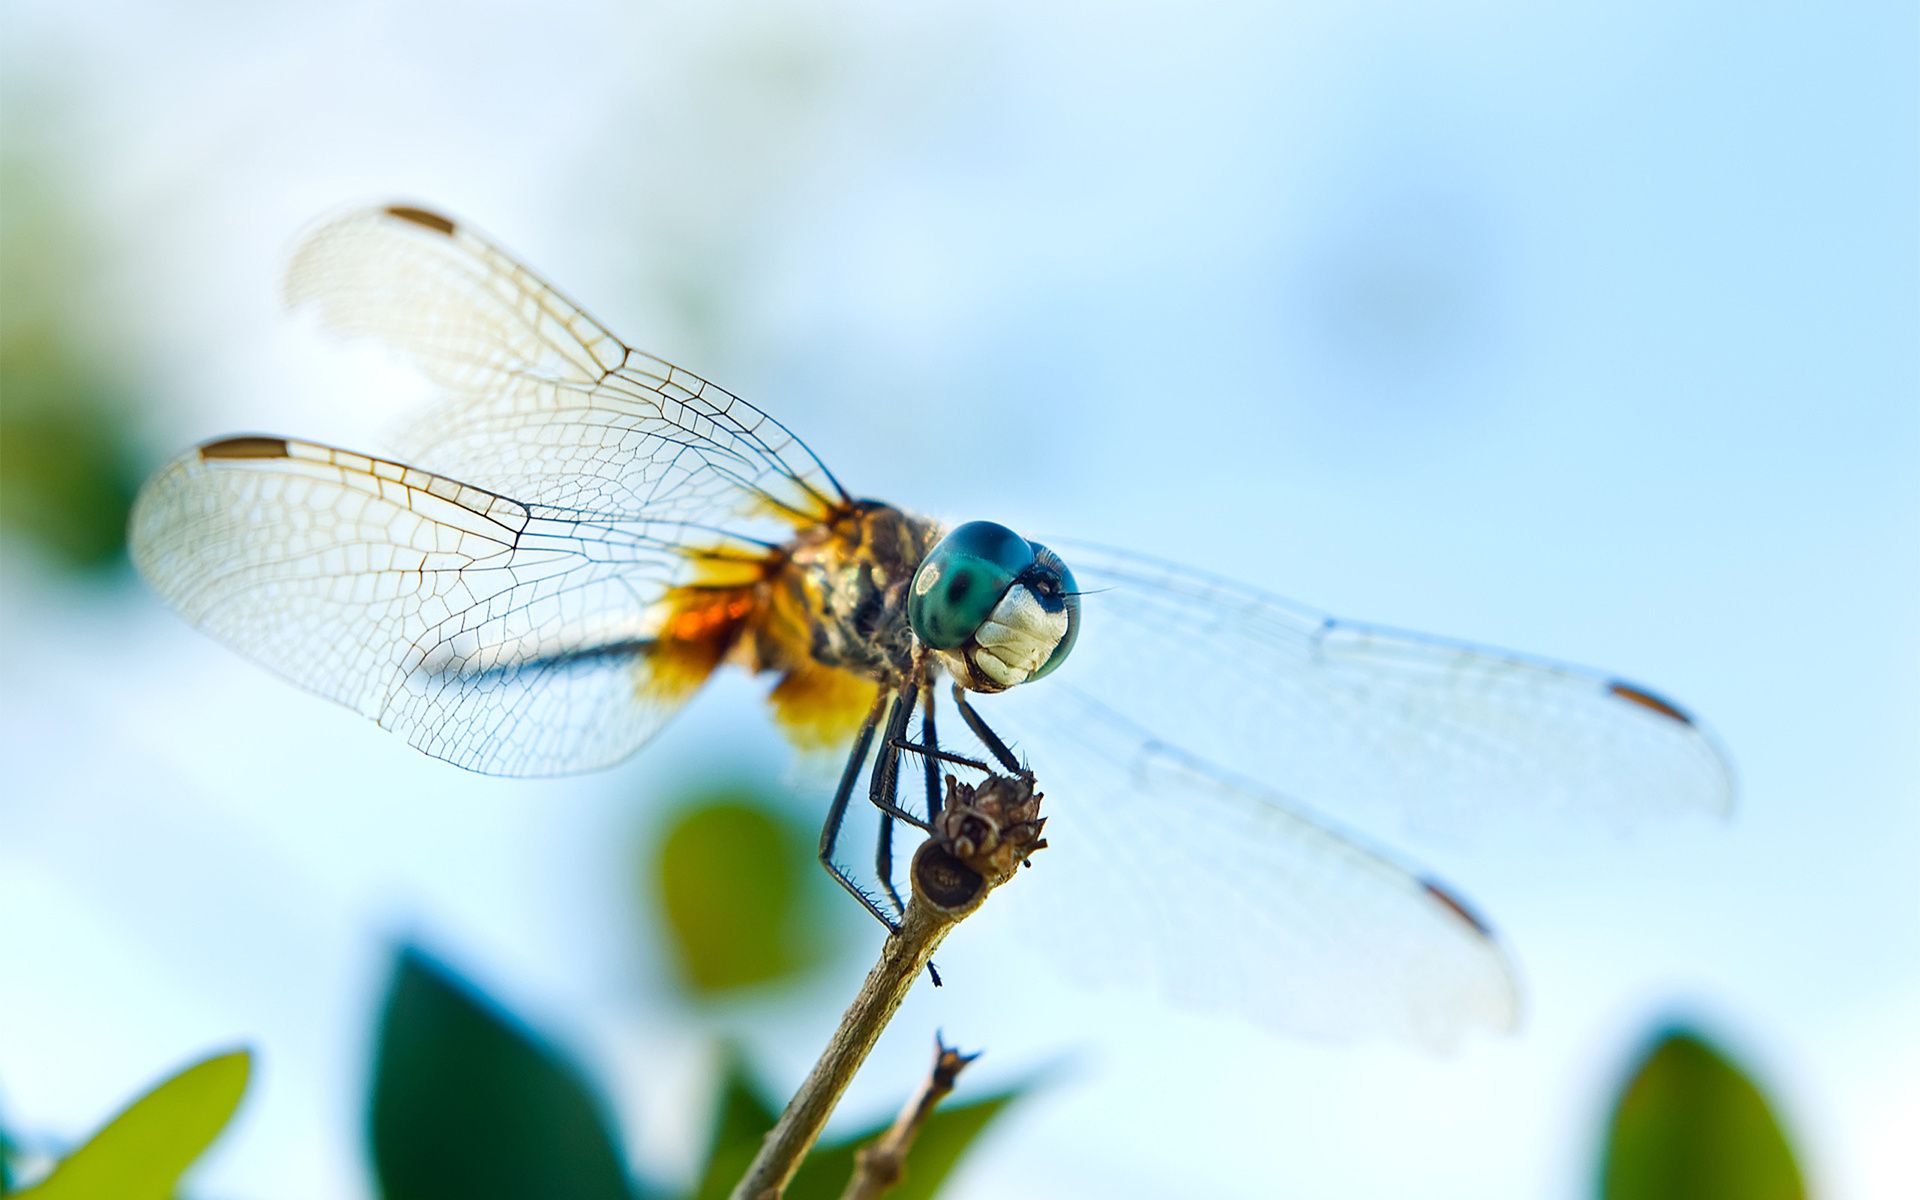 HD wallpaper, Awesome, Wallpaper, Dragonfly